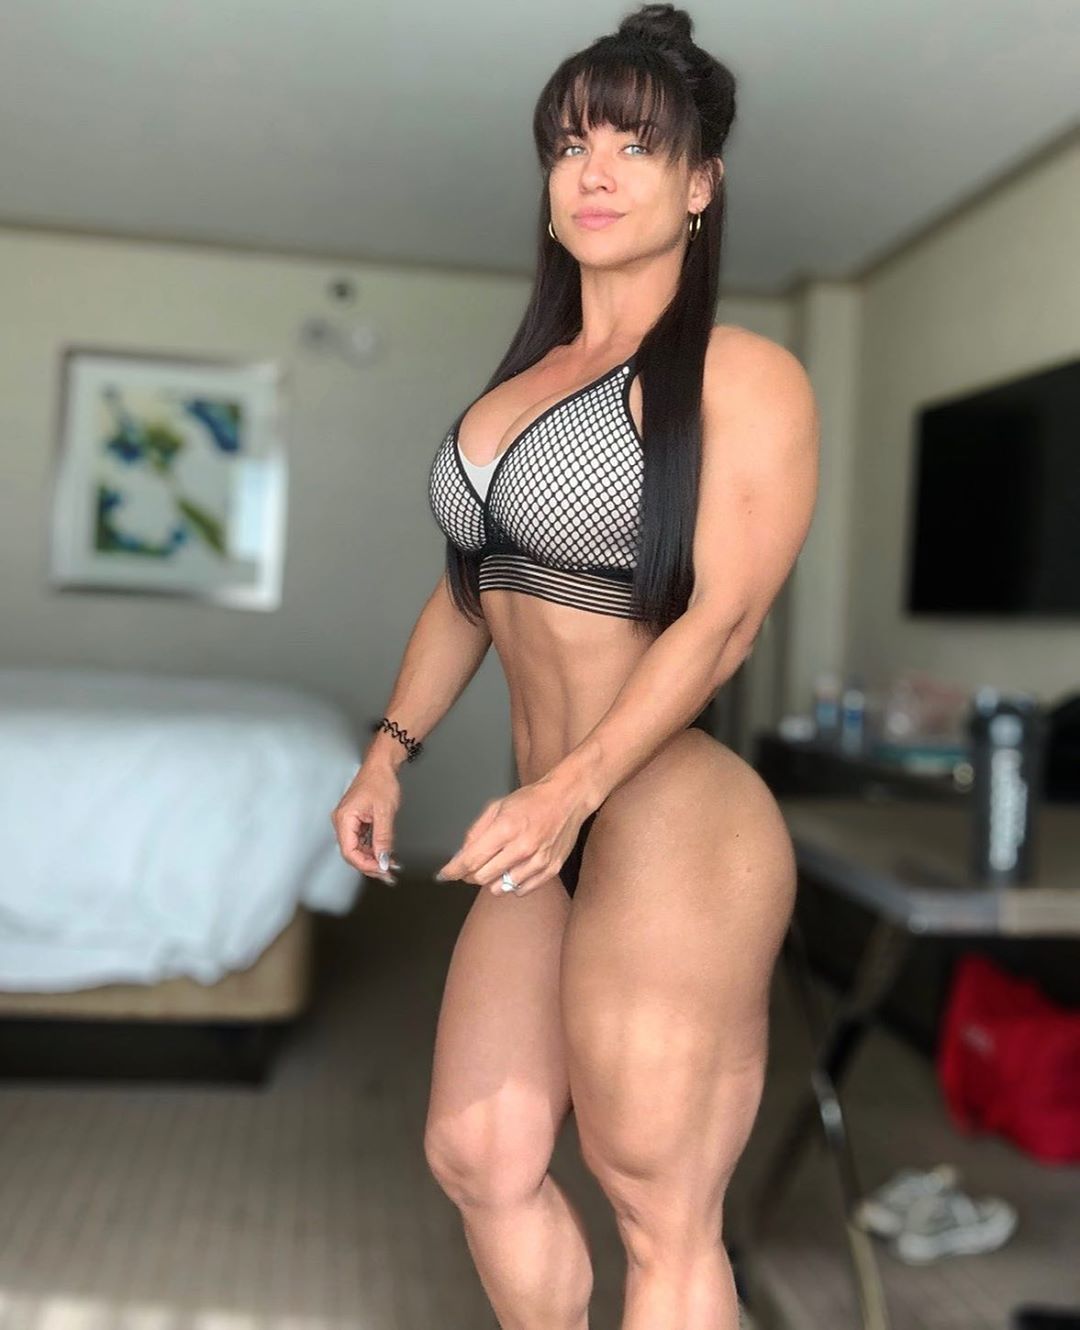 Fitness and figure competition